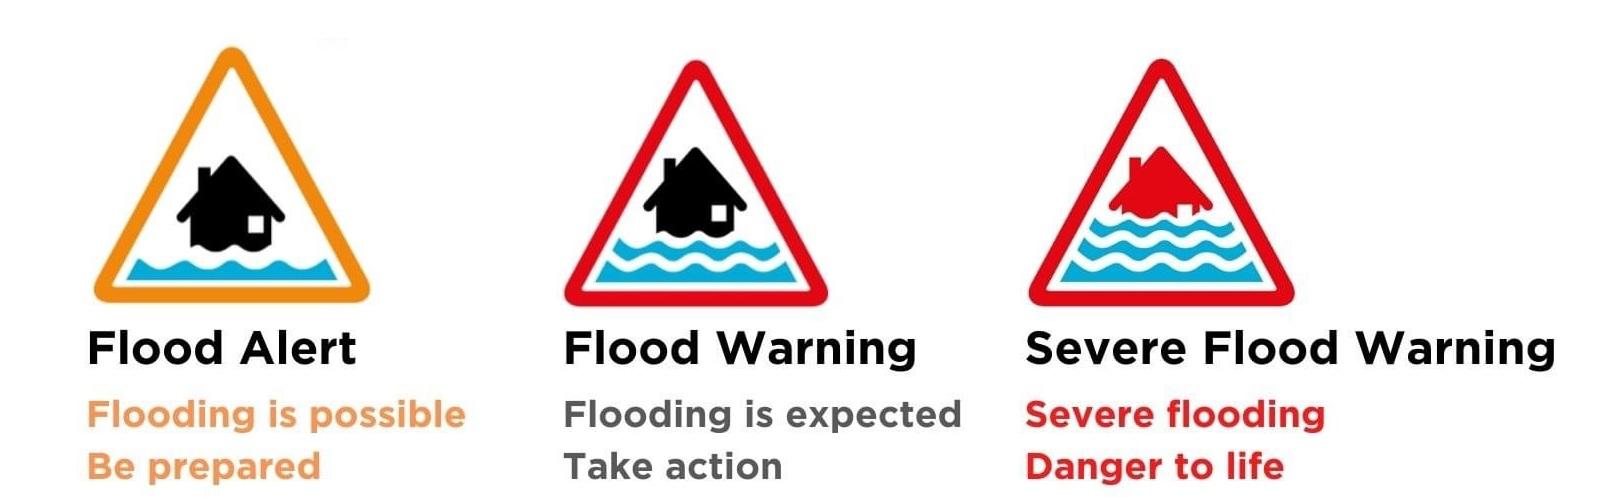 Flood warnings explained
Severe flood warning - Severe flooding - danger to life
Flood warning - flooding in expected - take action
Flood Alert - Flooding is possible be prepared